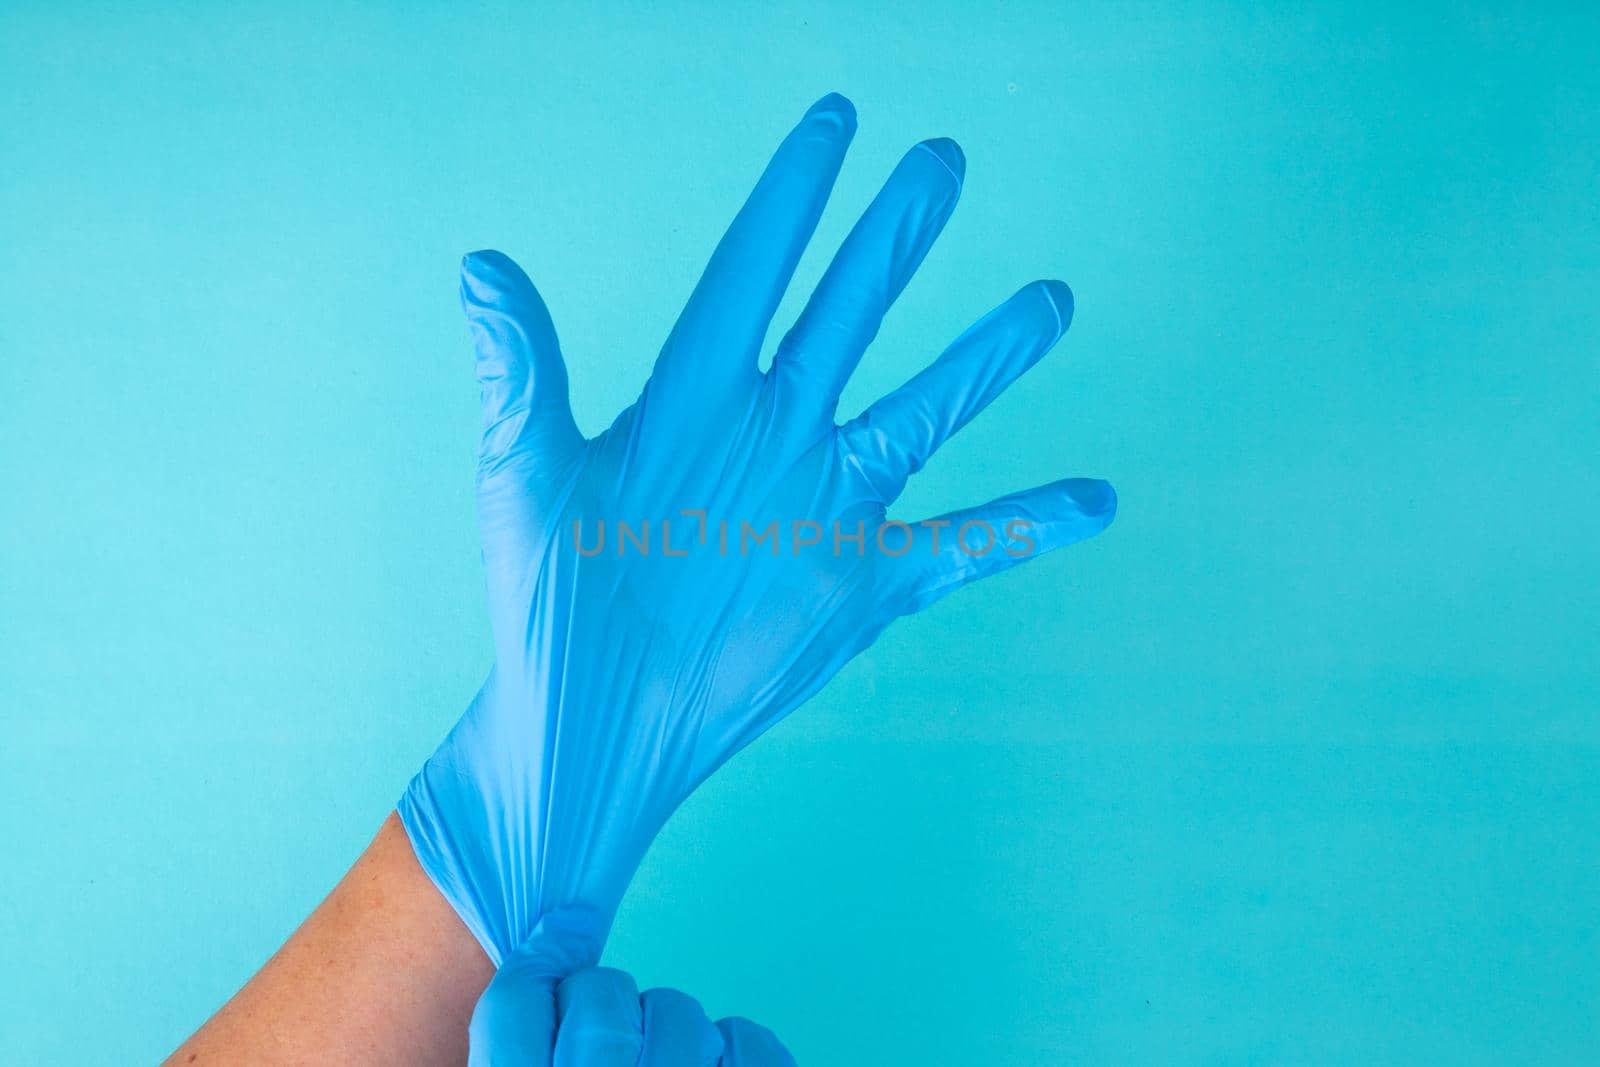 Doctor's hands wear rubber gloves on a blue background